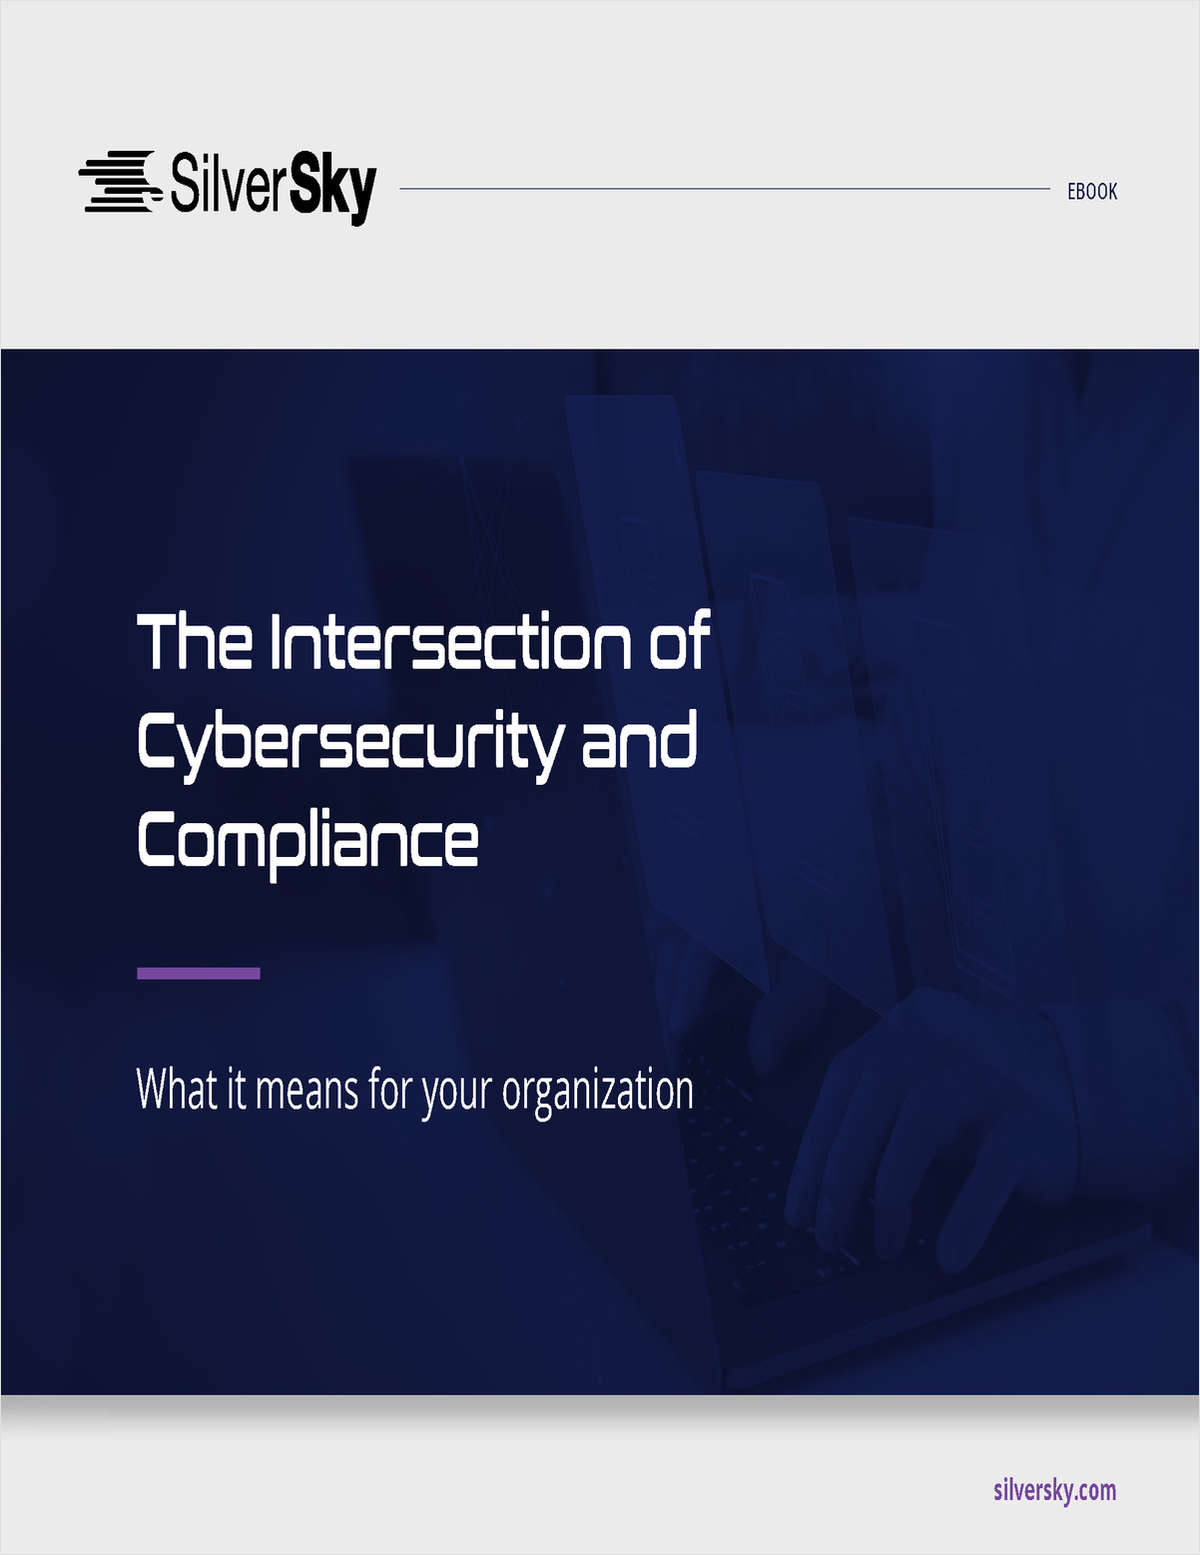 The Intersection of Compliance and Cybersecurity